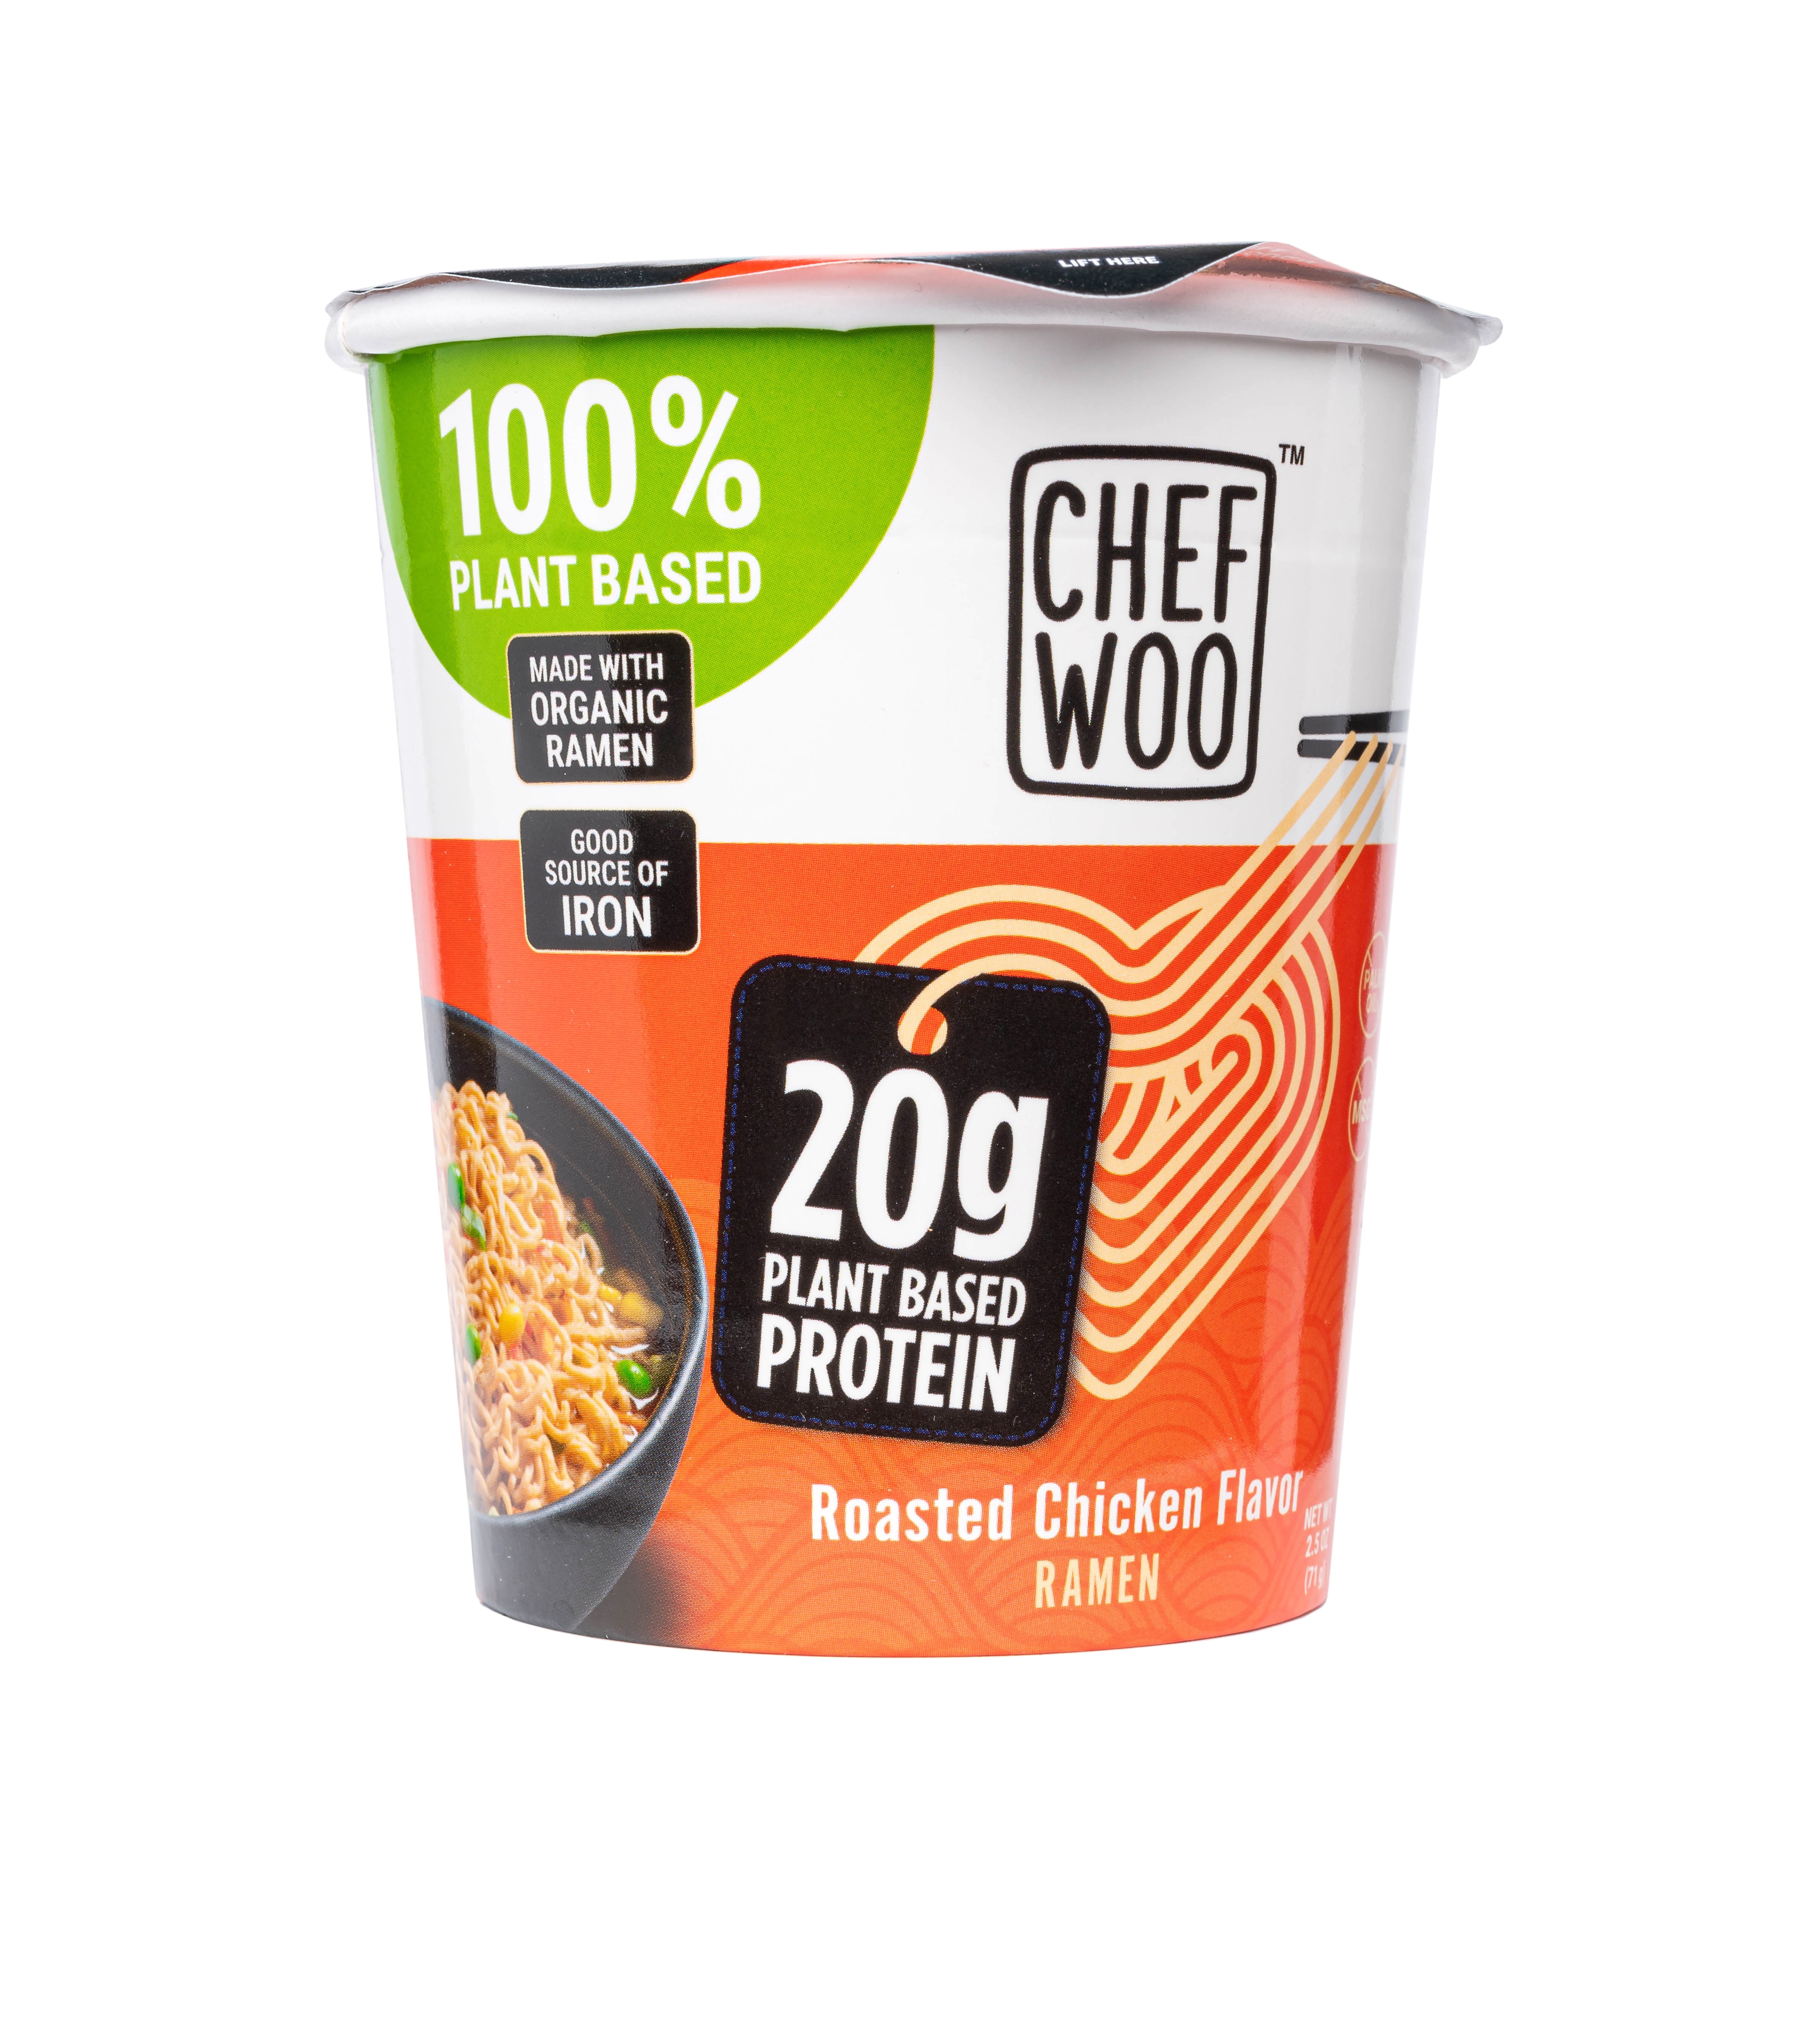 Chef Woo Roasted Chicken Flavor Instant Ramen with 20g Plant Based Protein, 1 Cup/2.5oz